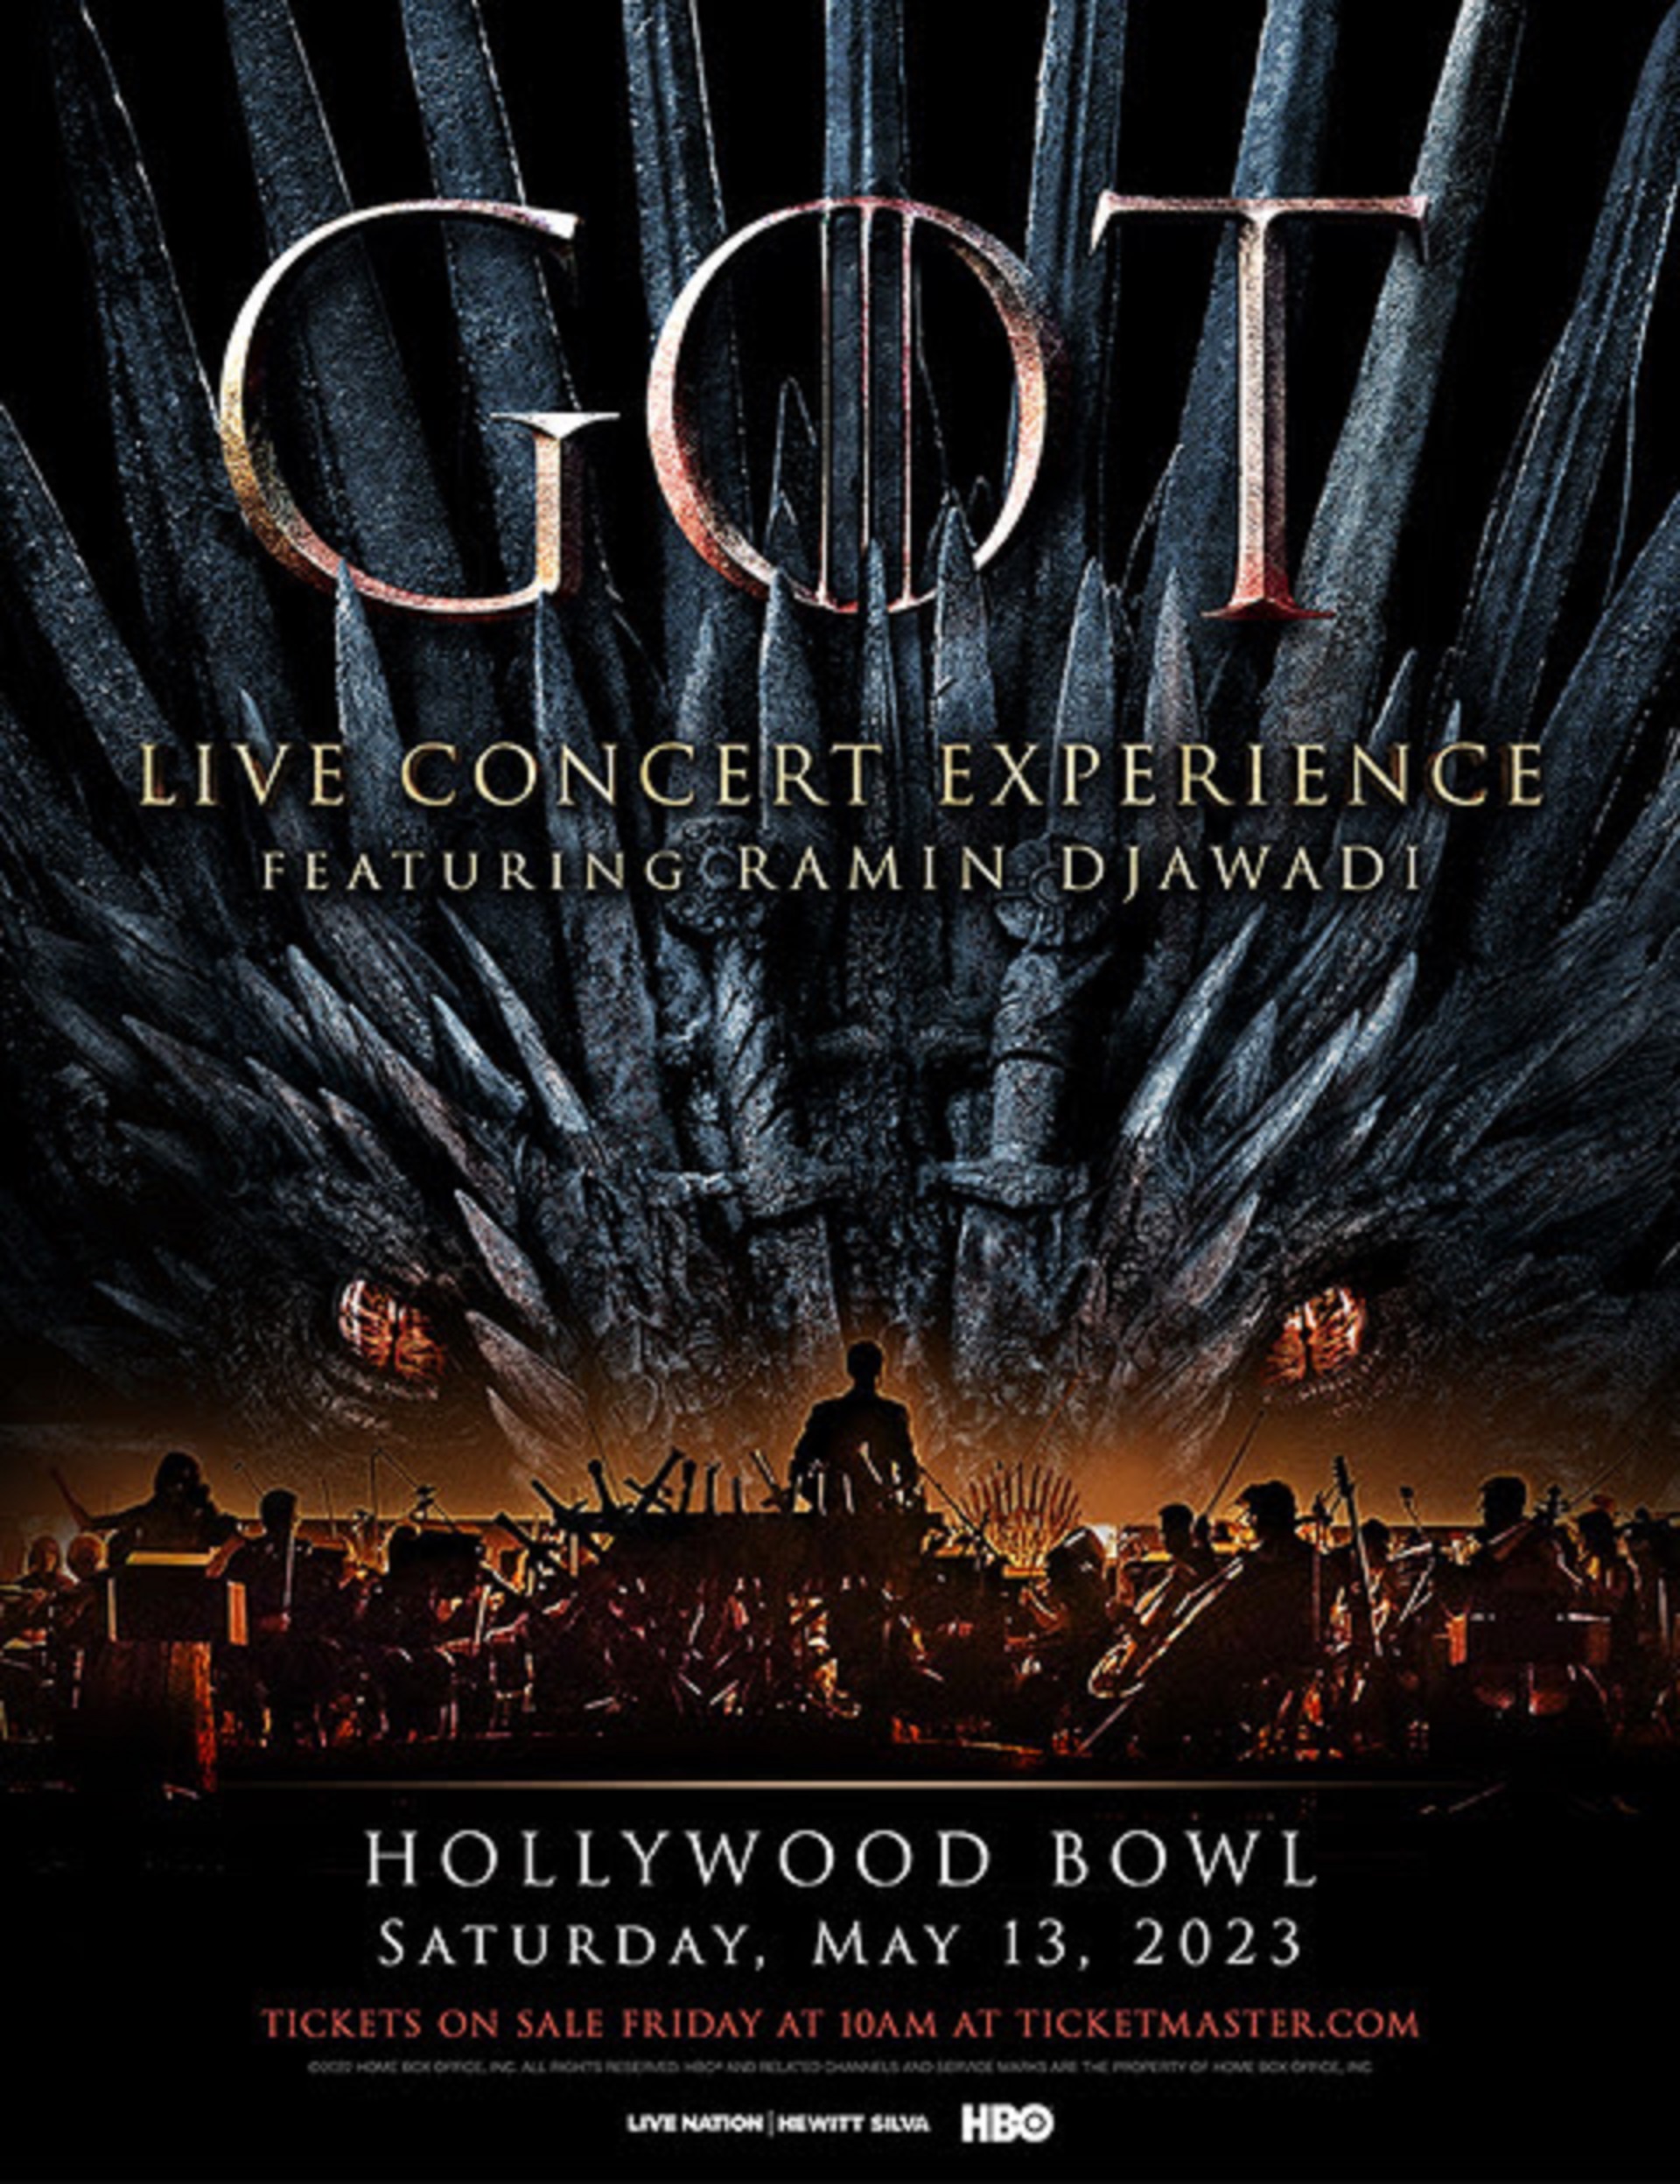 Game of Thrones Live Concert Experience Featuring Emmy-Award-Winning Composer Ramin Djawadi to Return for One Night Only